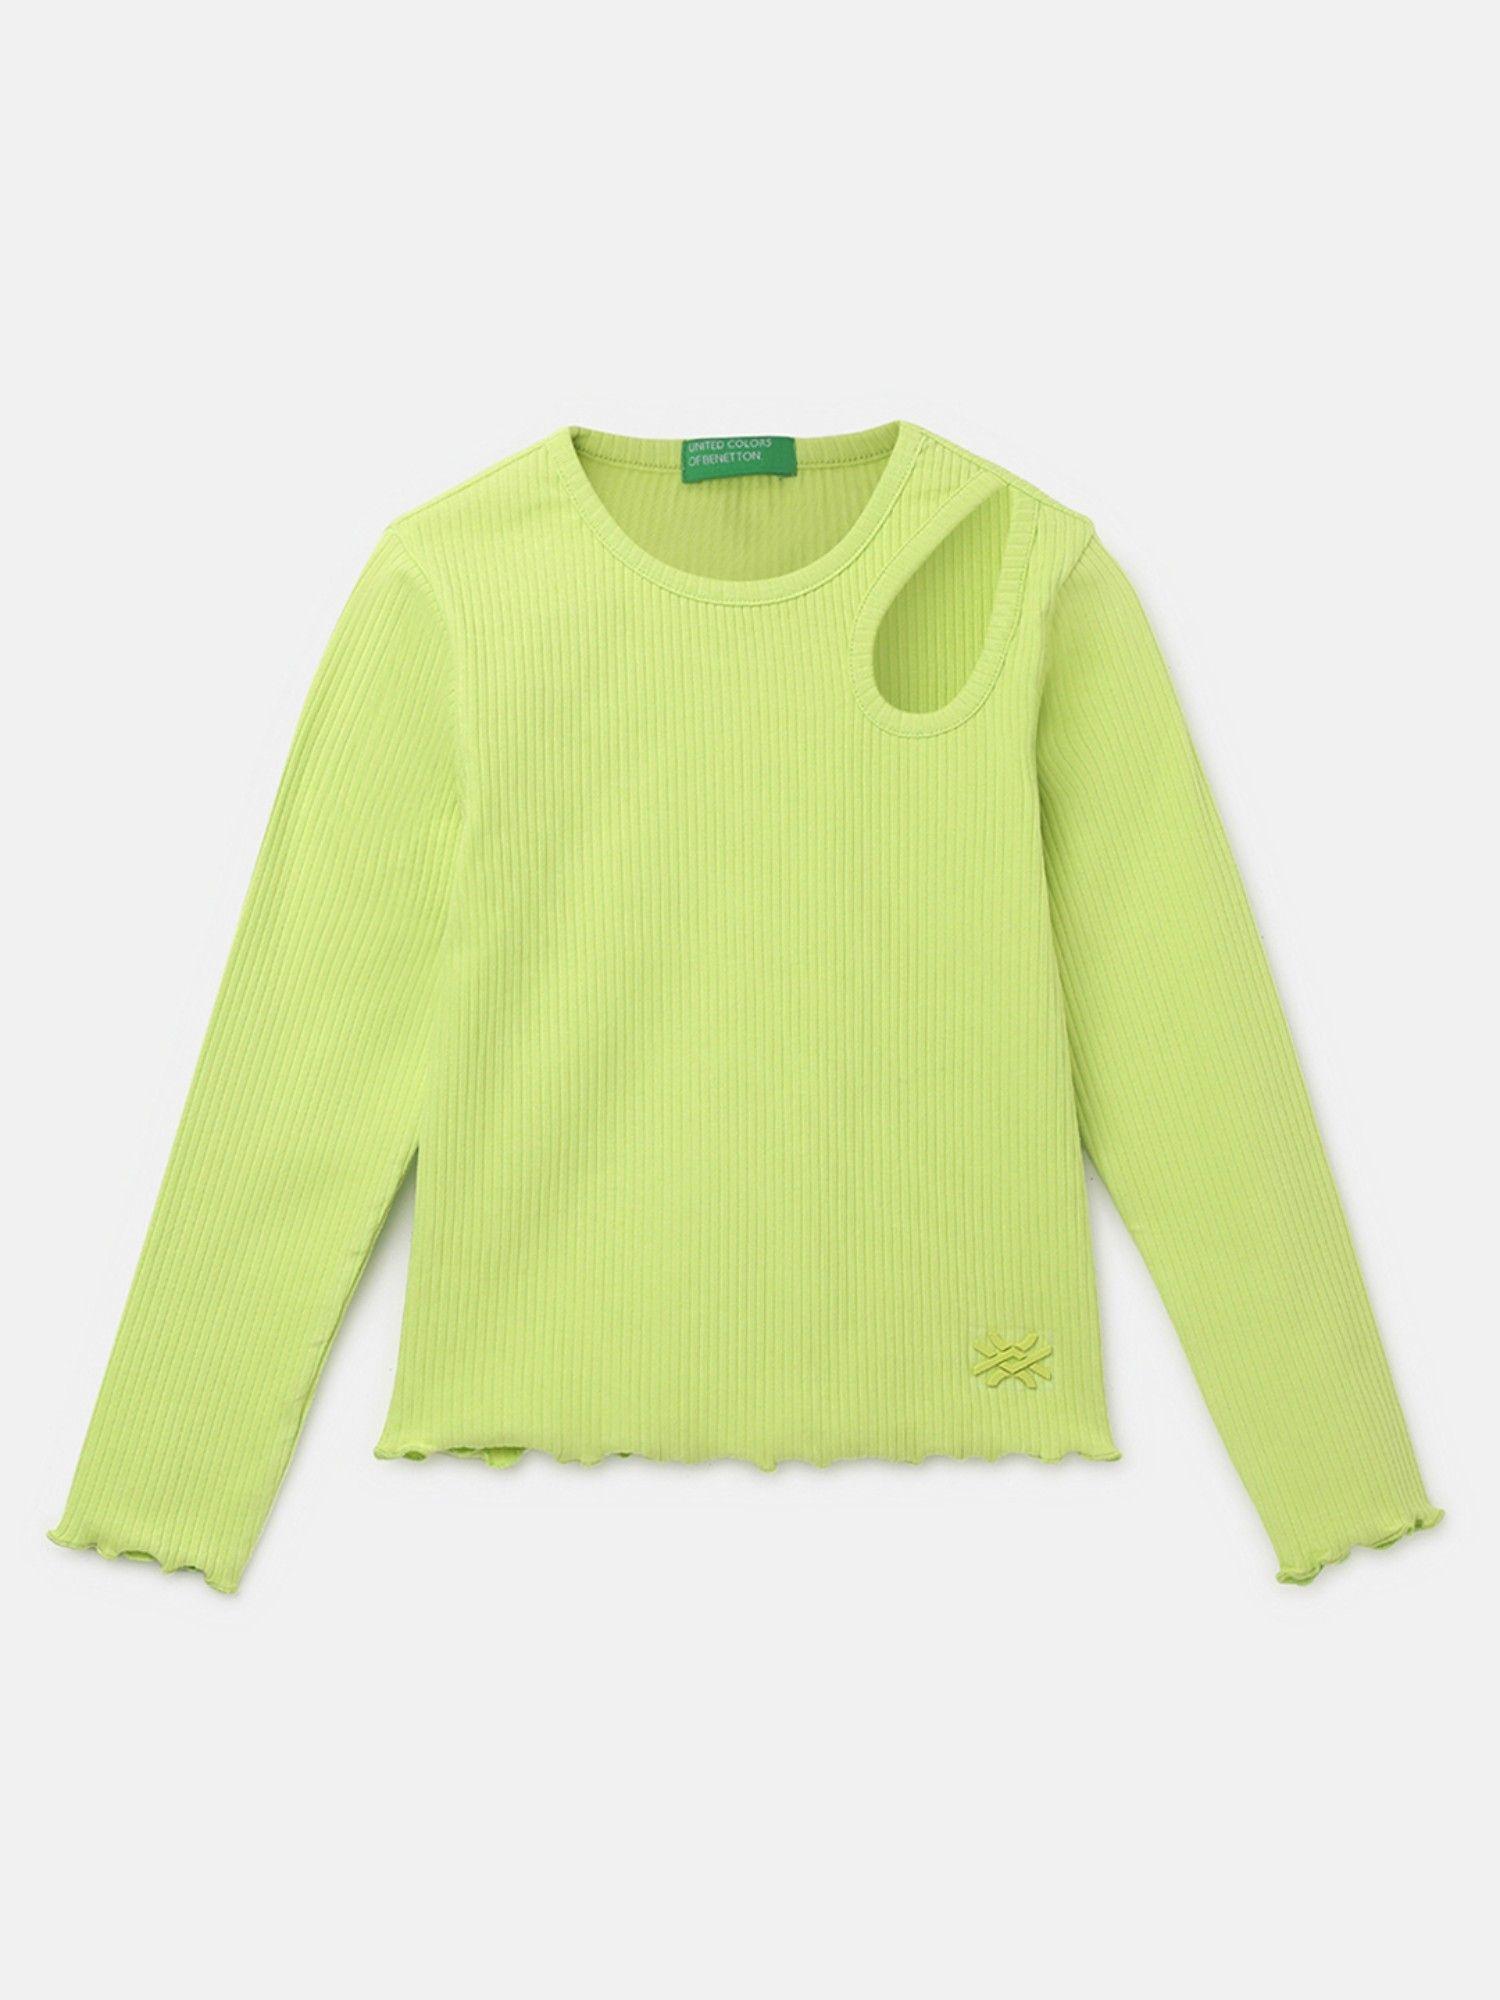 green regular fit round neck ribbed girls top